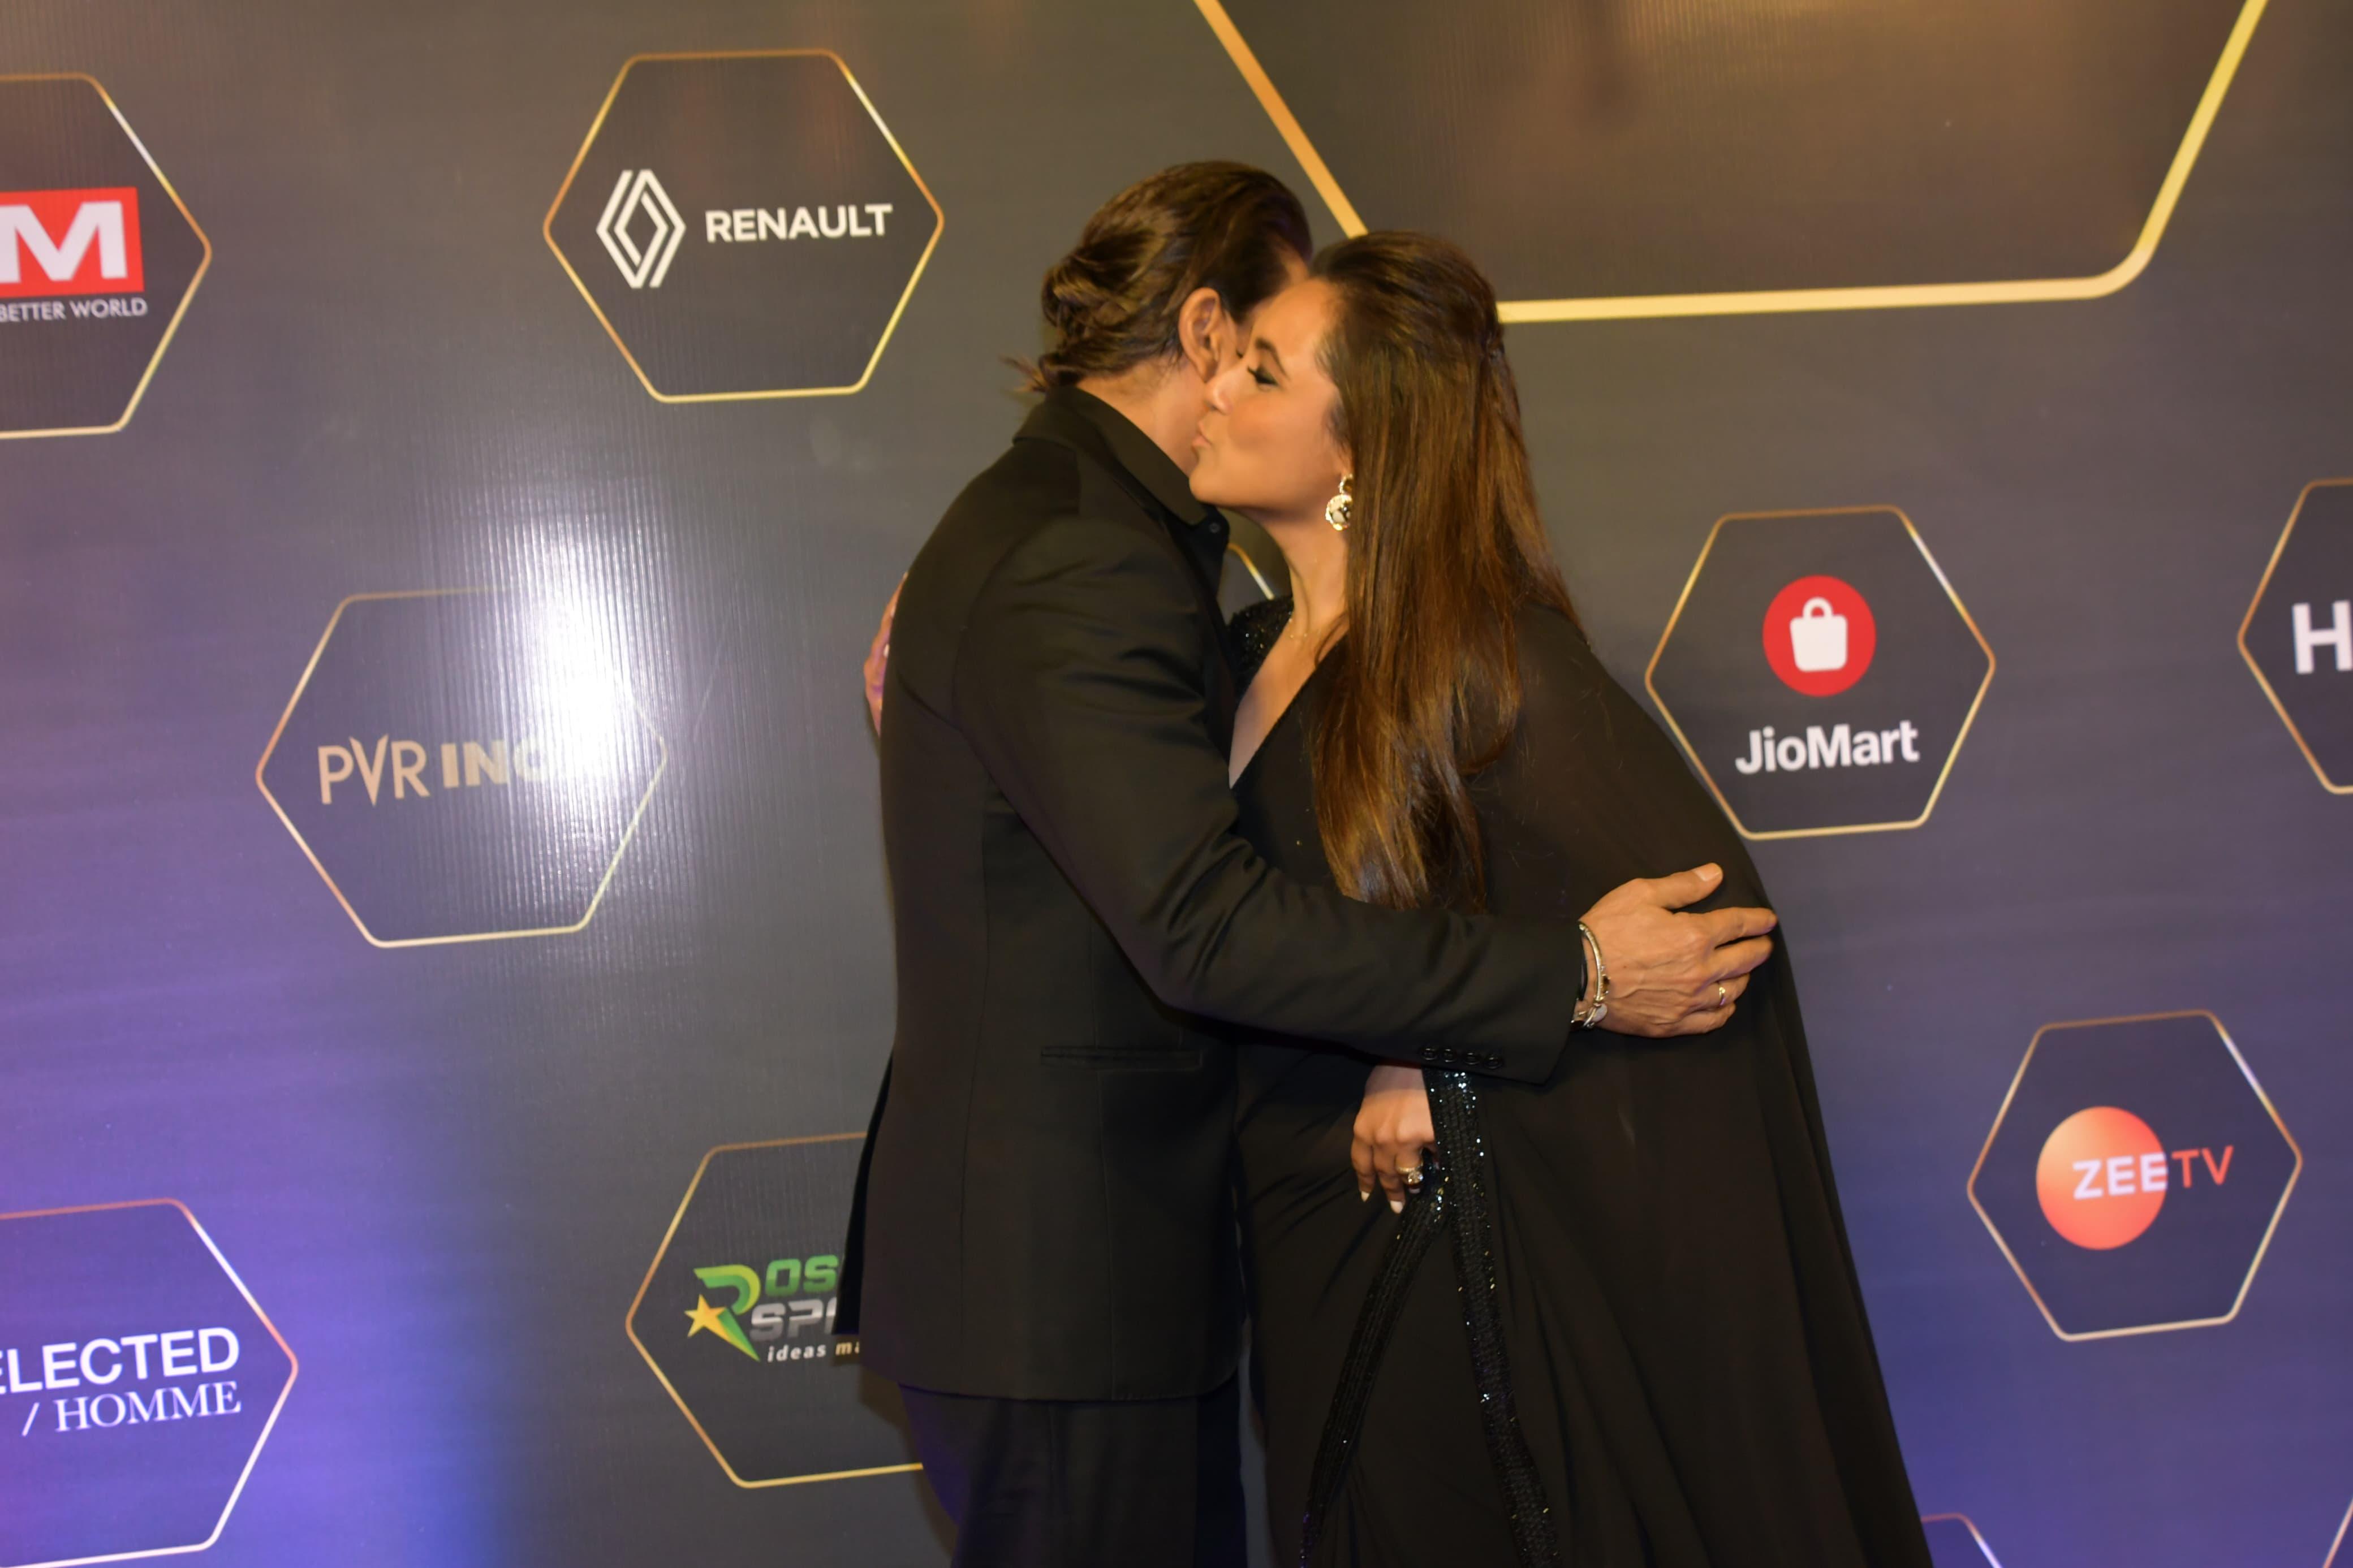 Shah Rukh Khan and Rani Mukerji shared a warm hug as they made a rare appearance together on the red carpet. Shah Rukh Khan bagged the award for the Best Actor for his performance in Jawan